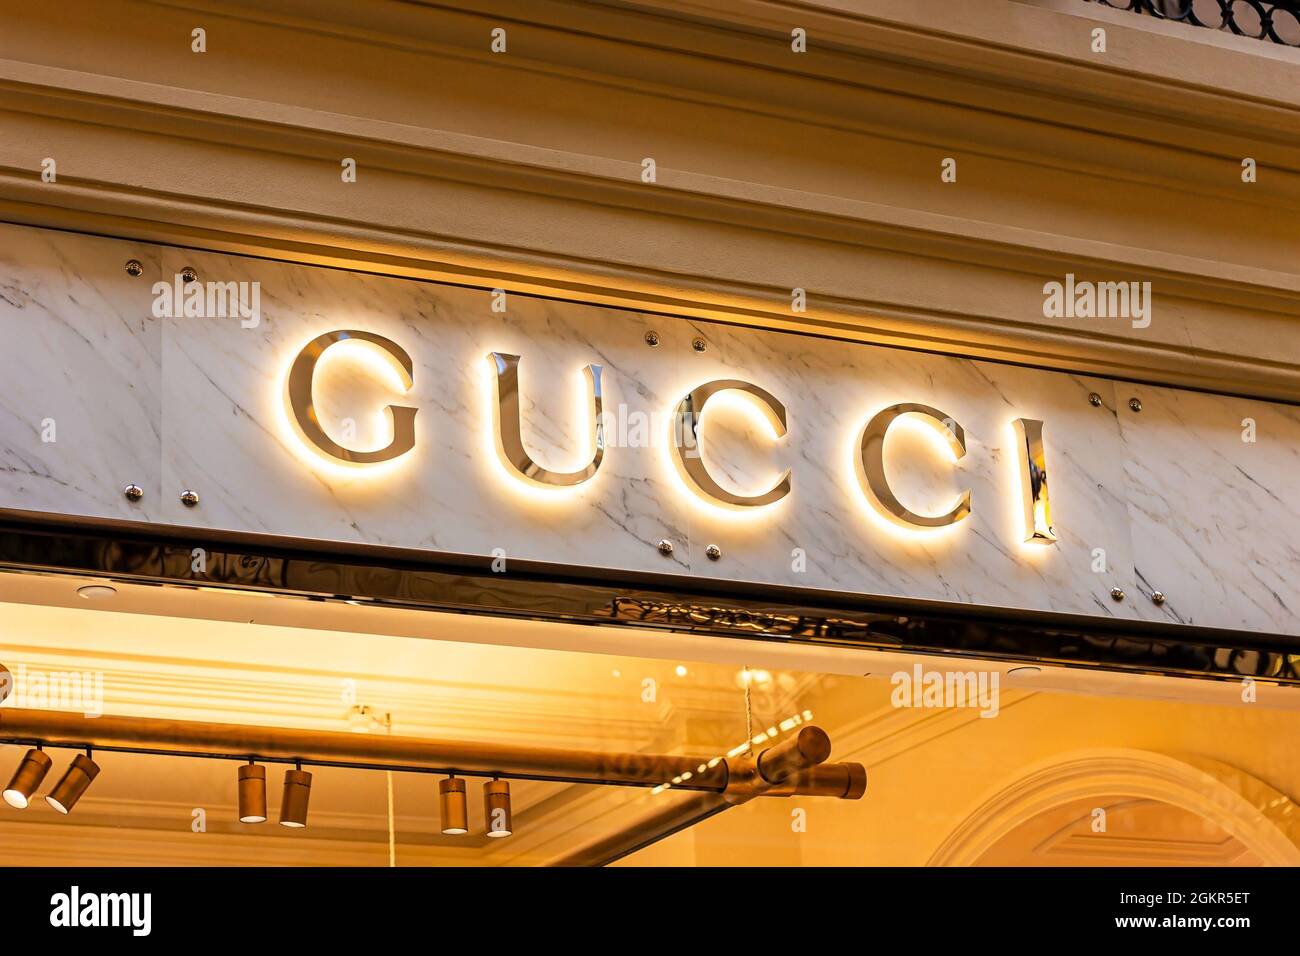 MOSCOW, RUSSIA - AUGUST 10, 2021: Gucci retail shop logo singboard on the storefront in the shopping mall. Stock Photo